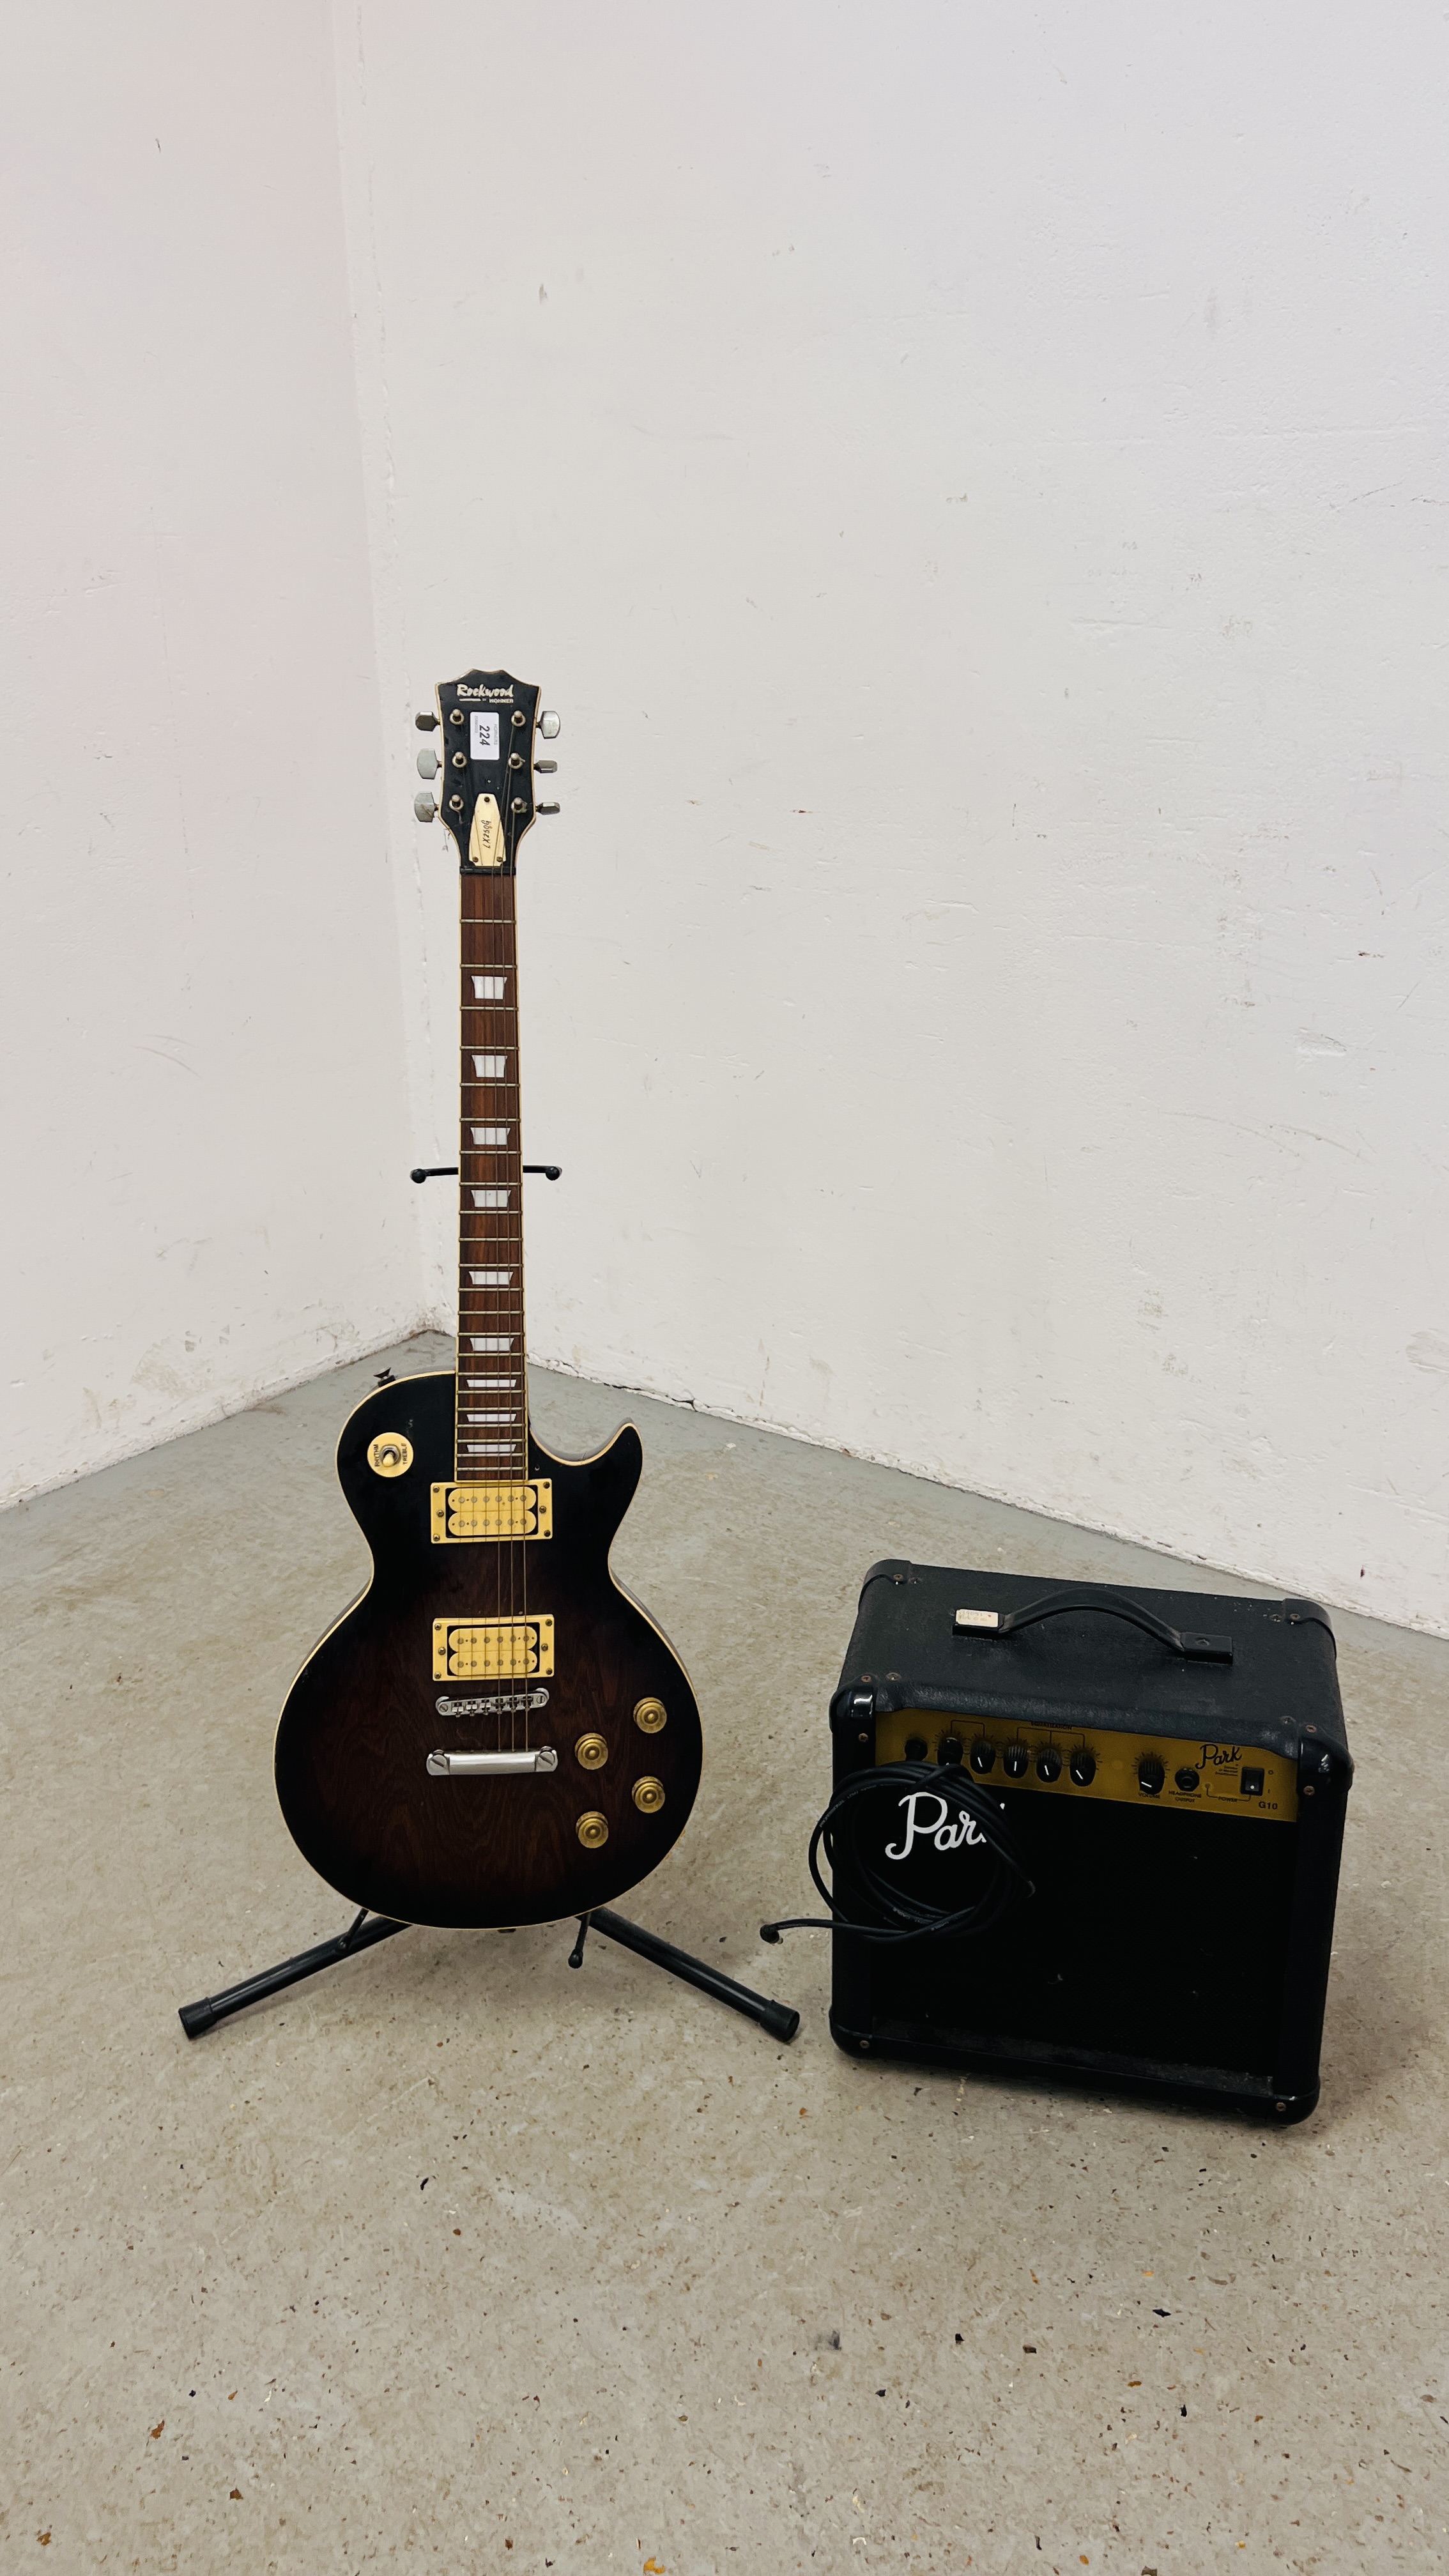 A ROCKWOOD BY HOHNER "LX25OG" ALONG WITH PARK MODEL G10 AMPLIFIER AND DIXON STAND - SOLD AS SEEN.